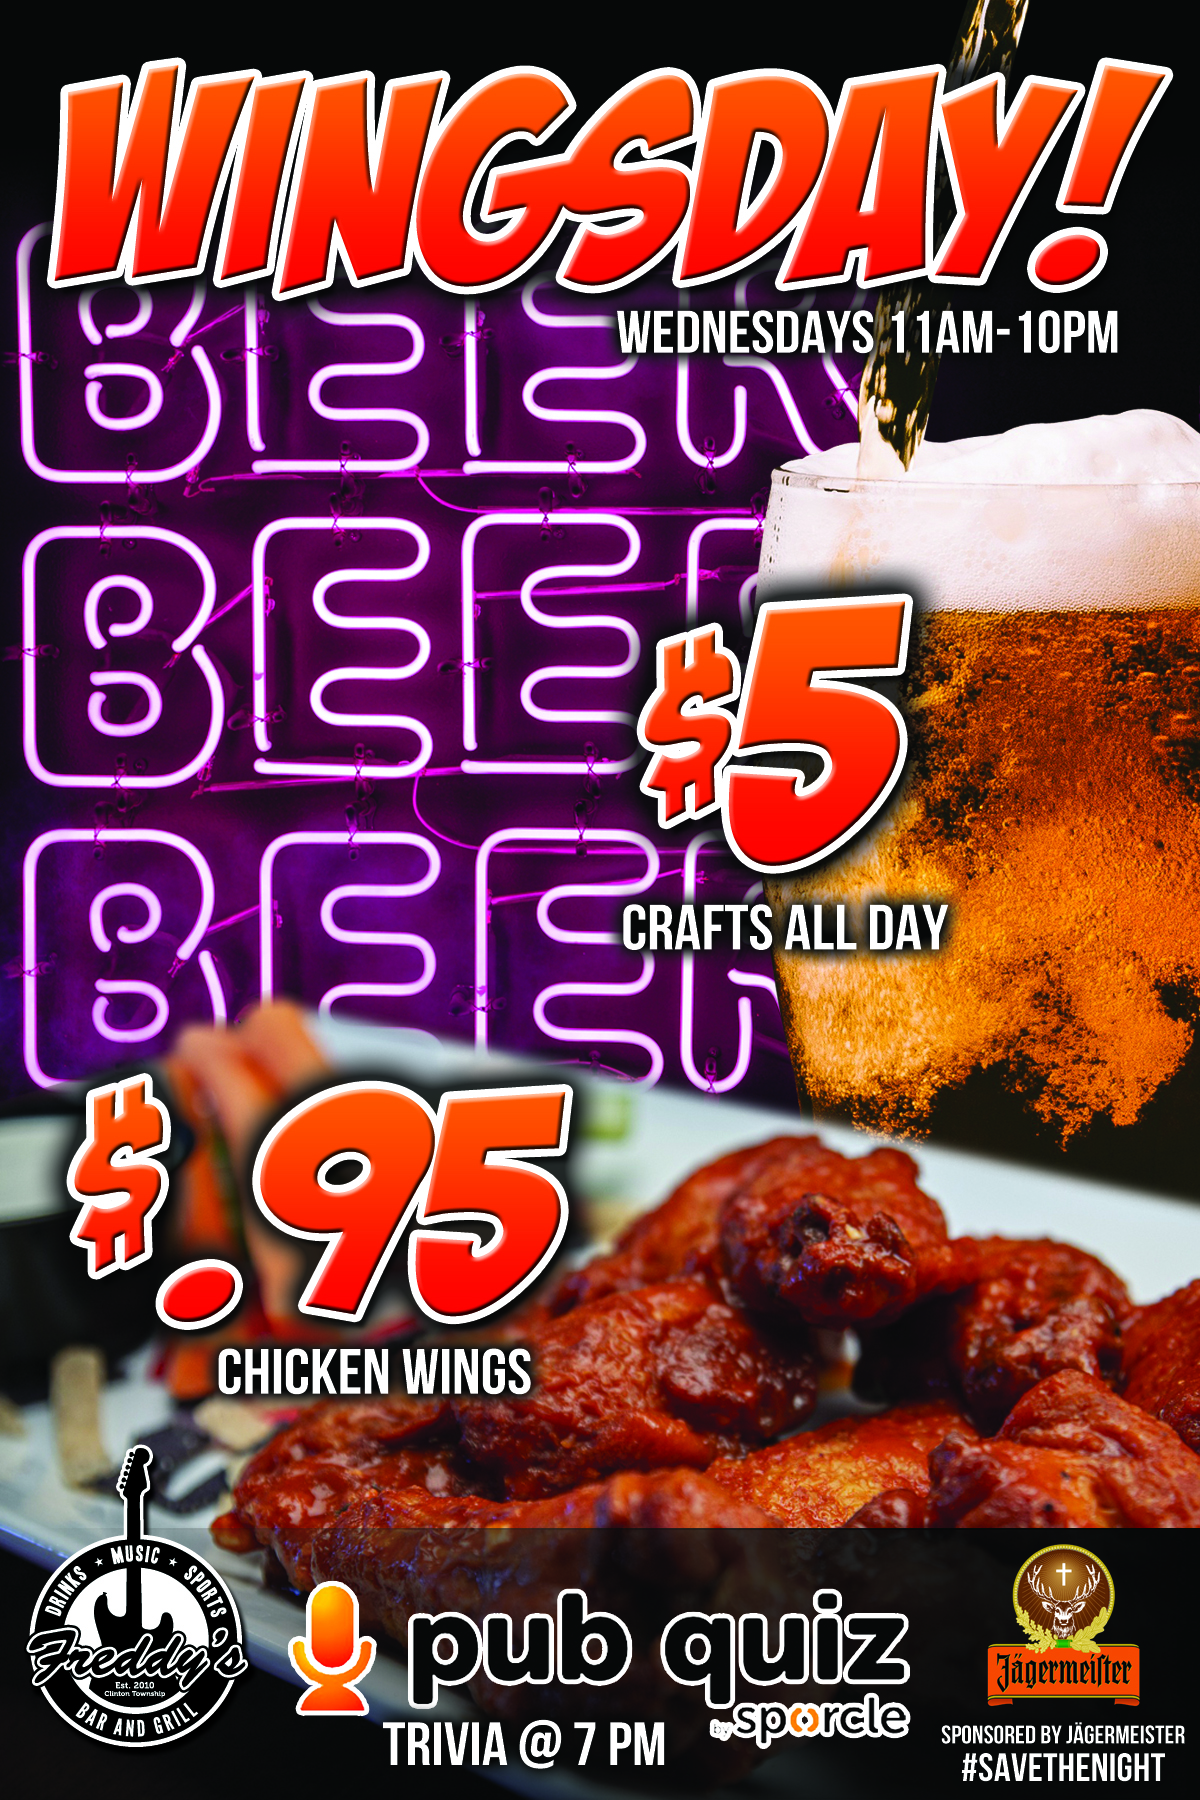 Wednesday Wings & Beer @ Freddy's Bar & Grill